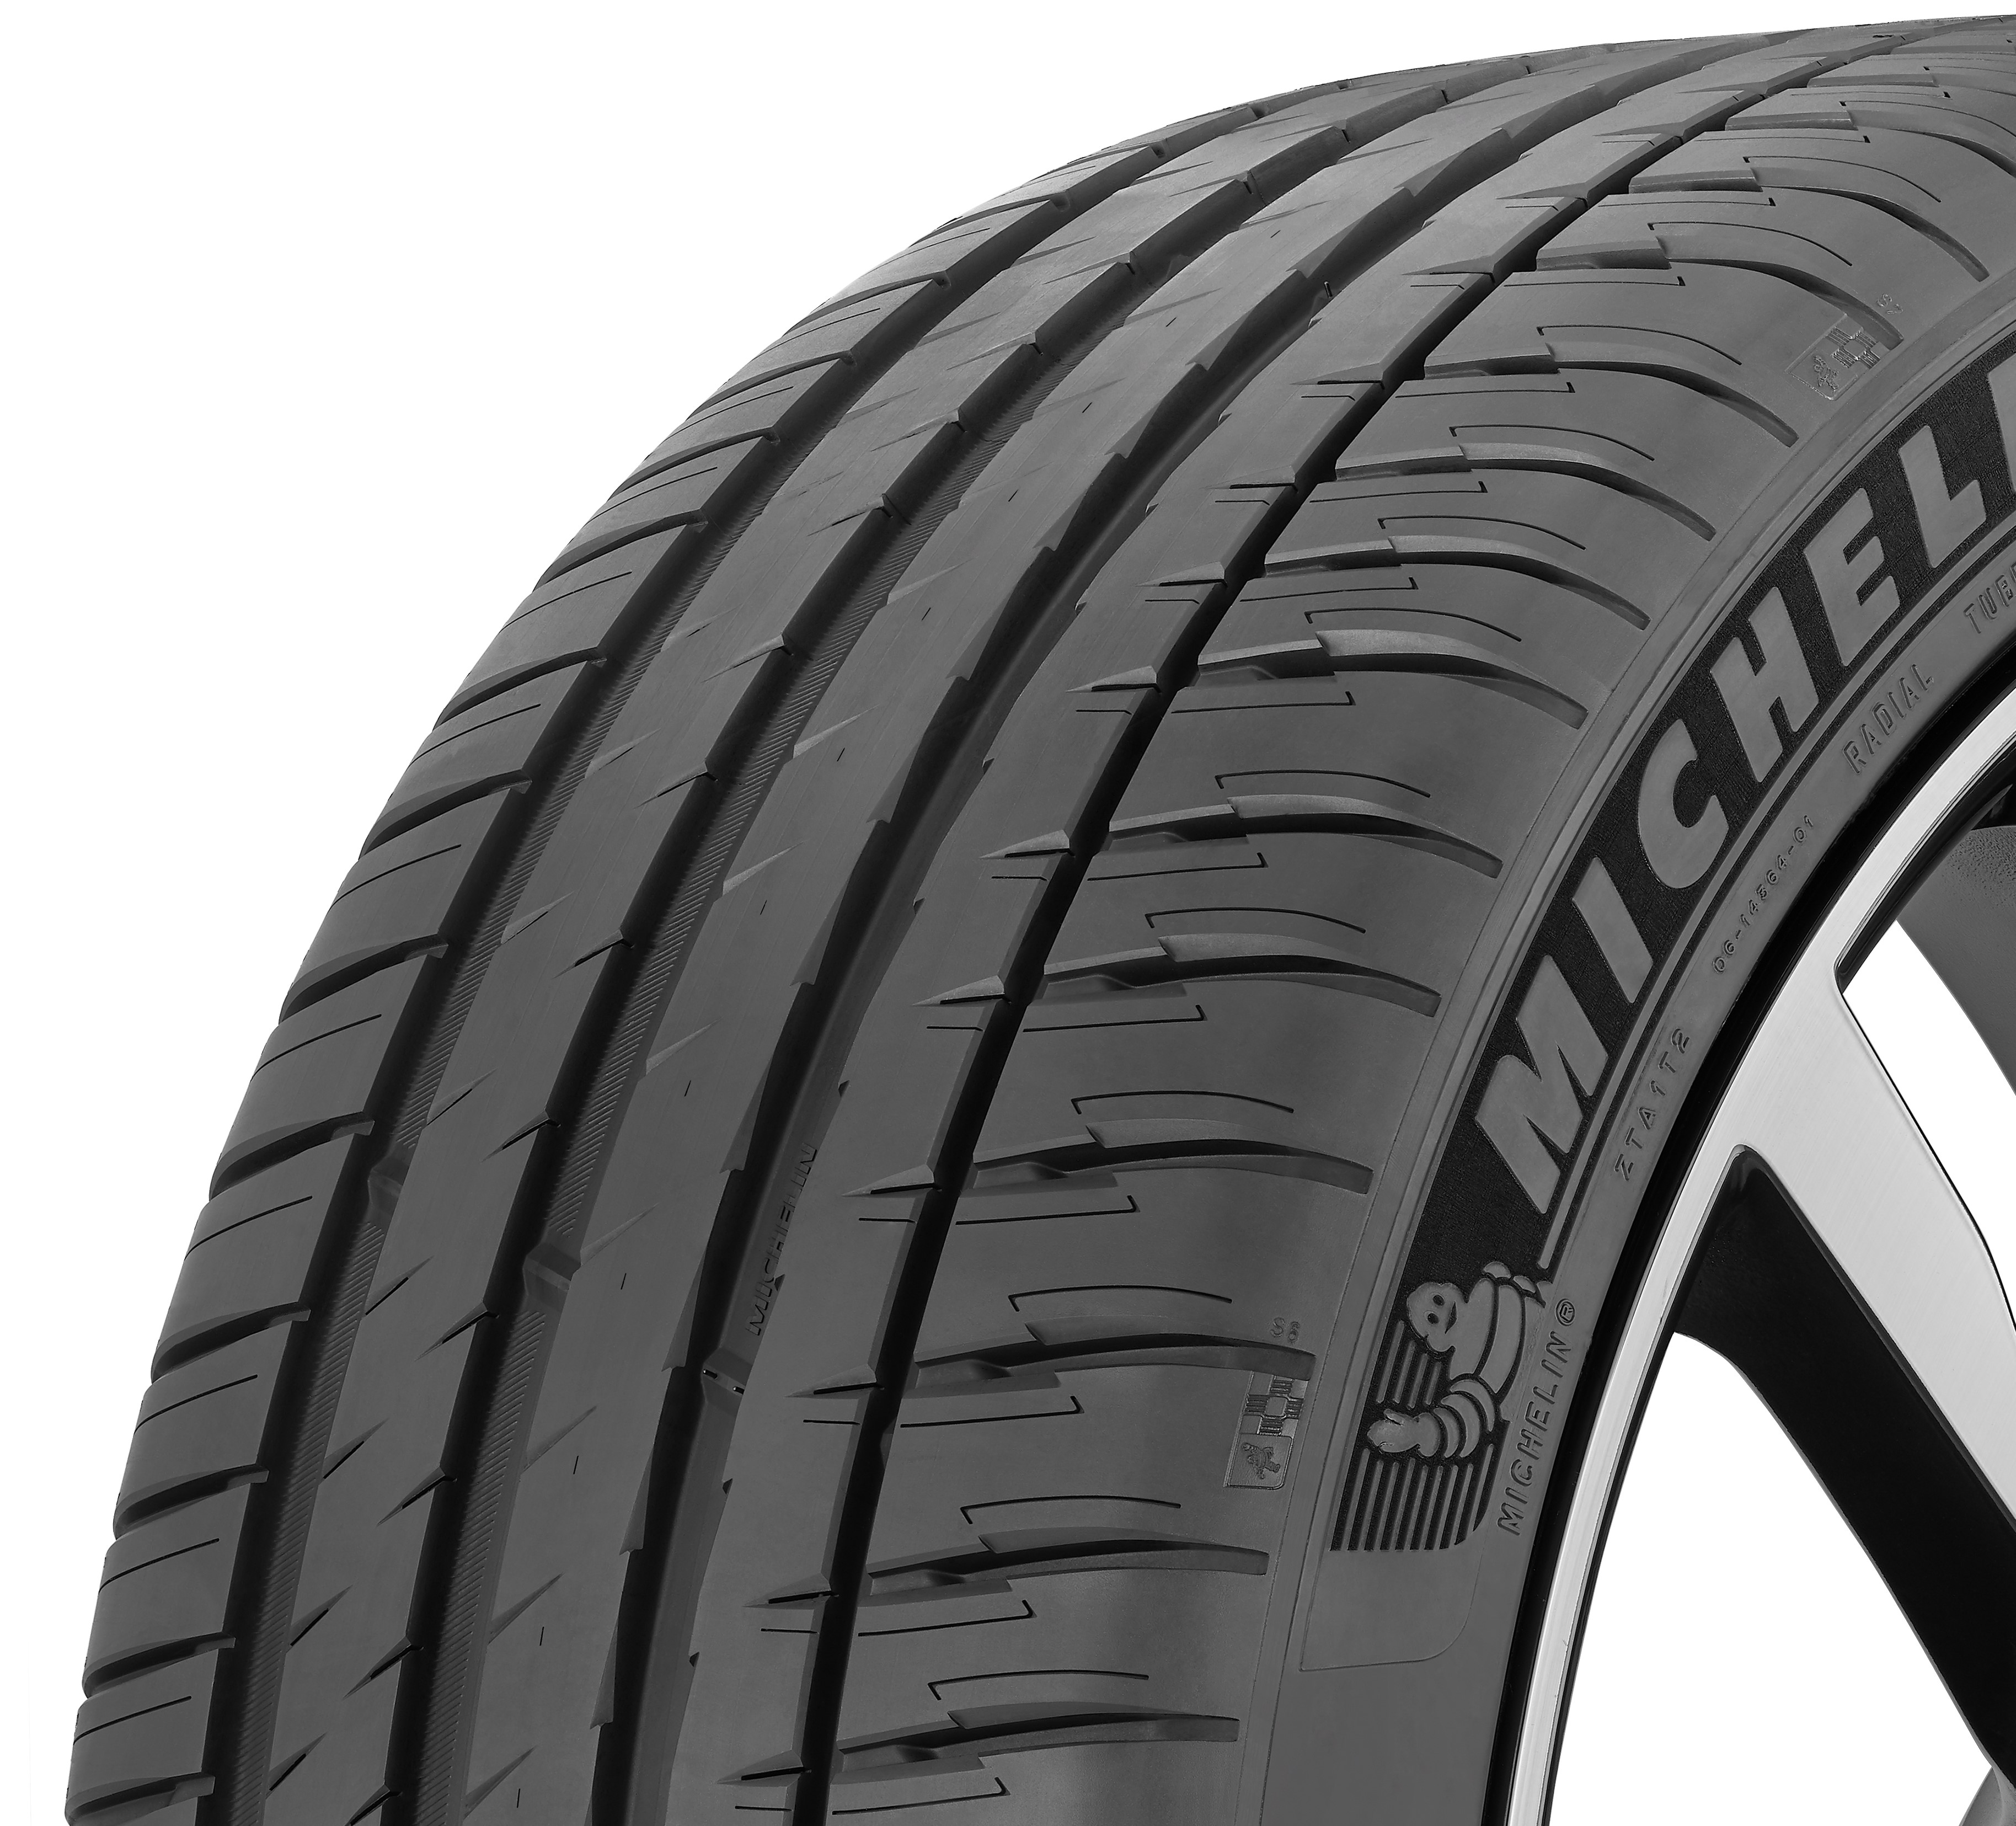 Michelin Sport 4 - Reviews and tests | TheTireLab.com